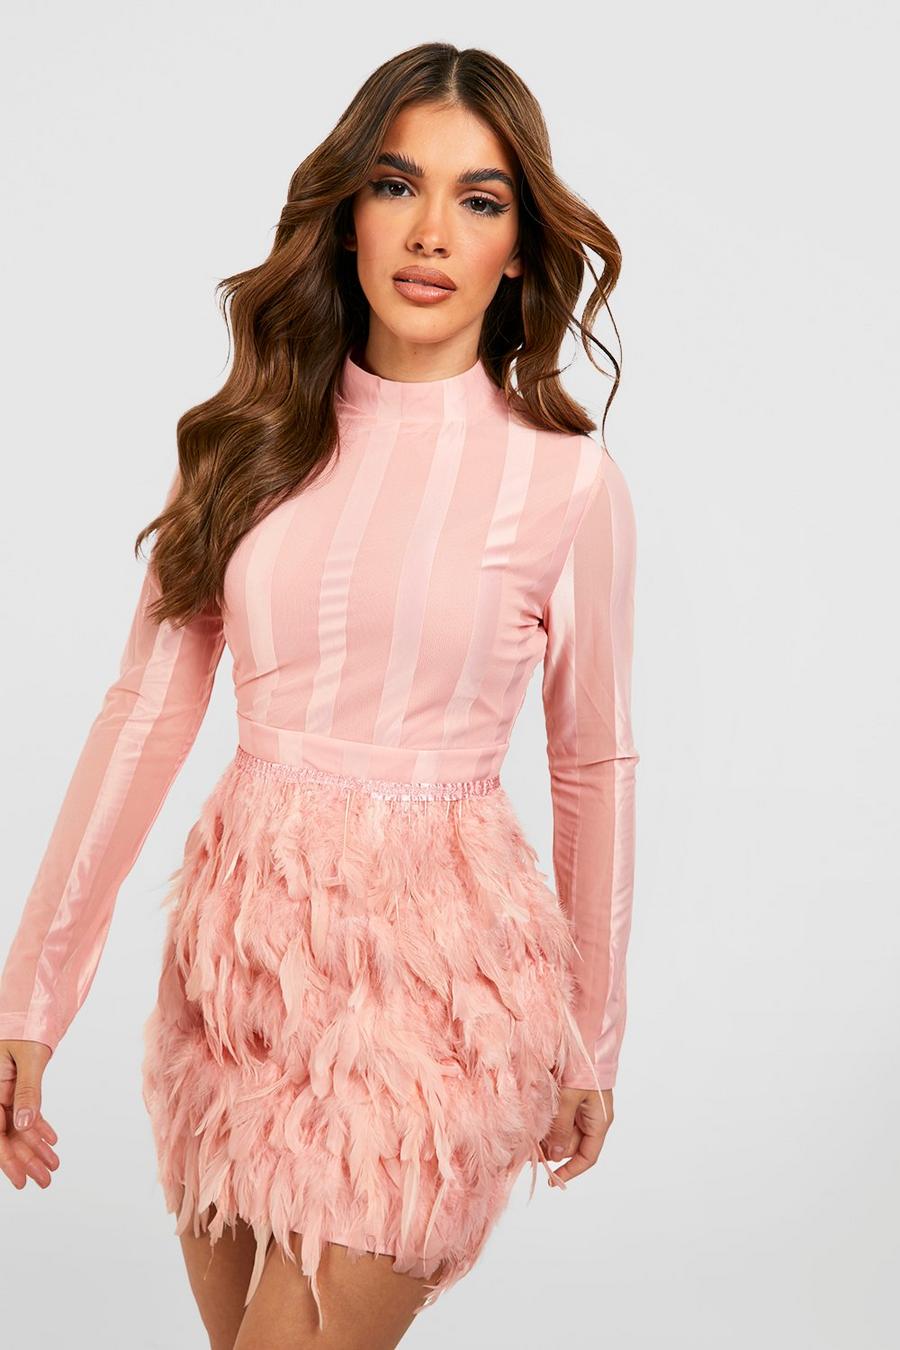 Blush pink High Neck Feather Skirt Mini Party Dress